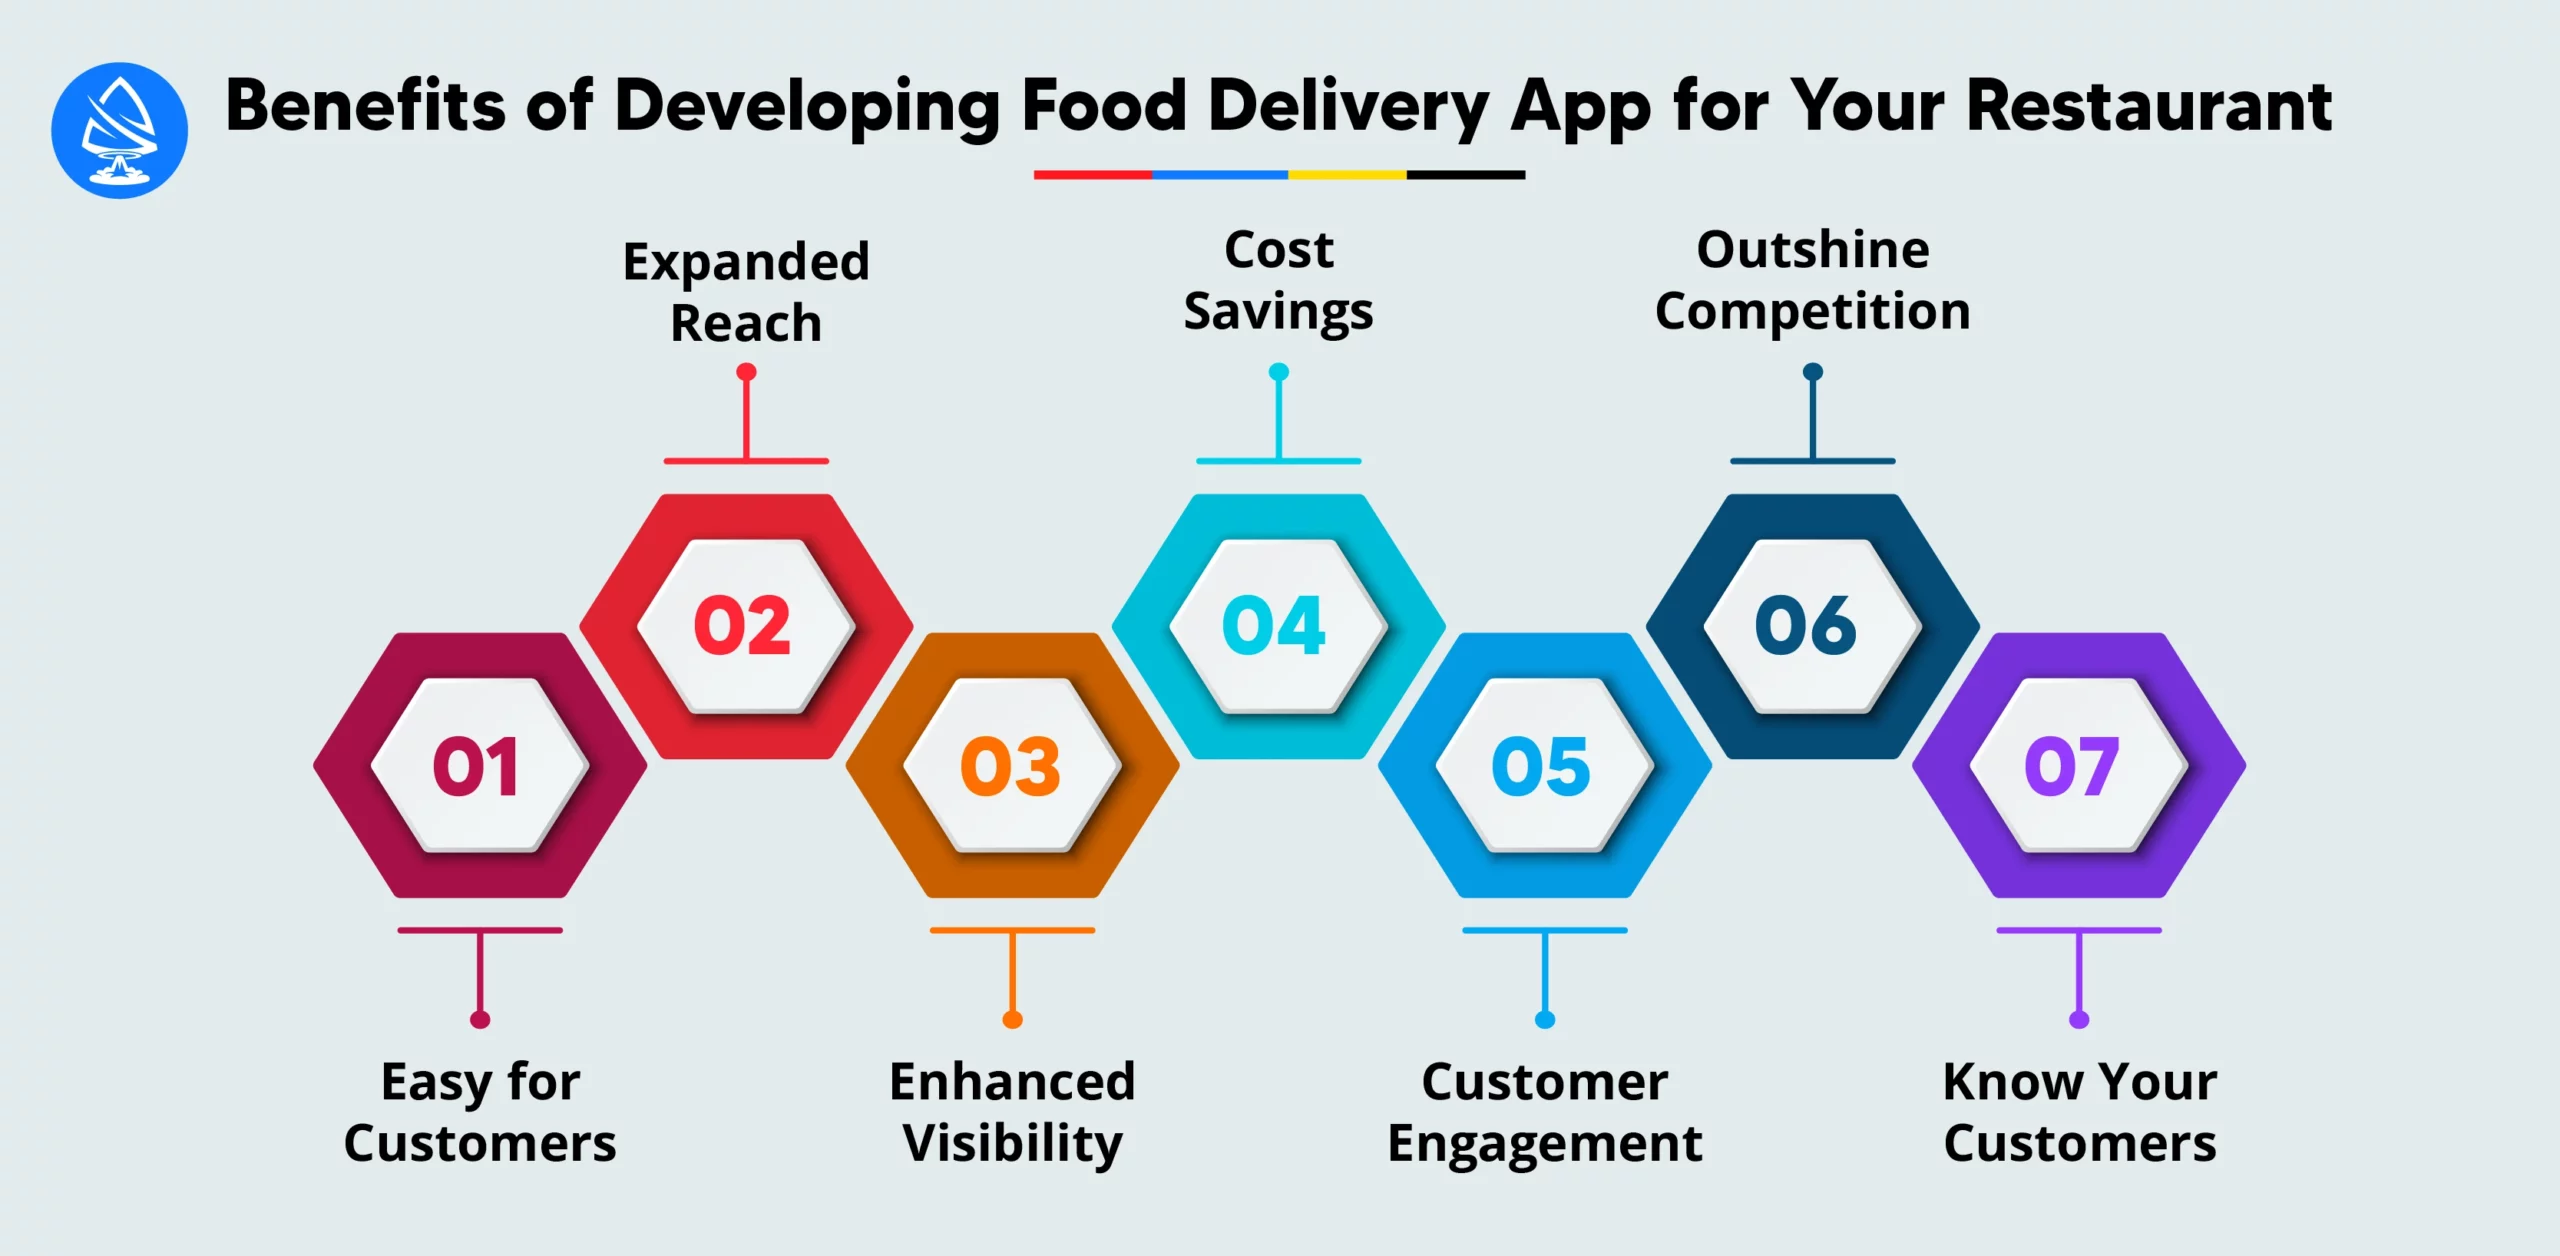 Benefits of Developing a Food Delivery App